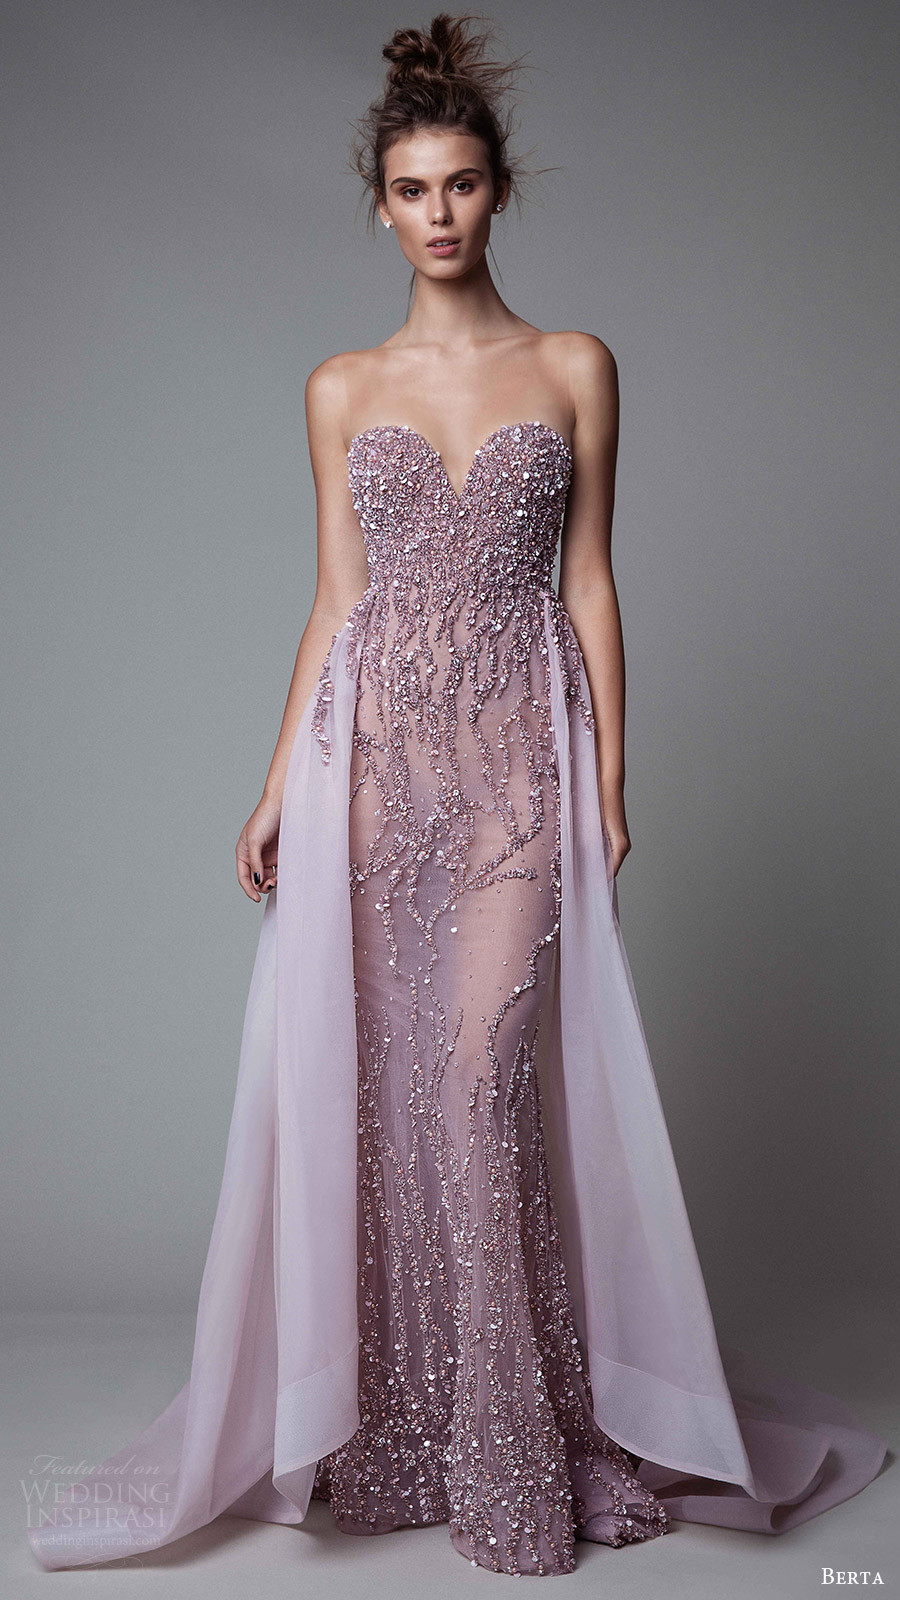 Evening Gowns For Wedding
 Berta Fall 2017 Ready to Wear Collection